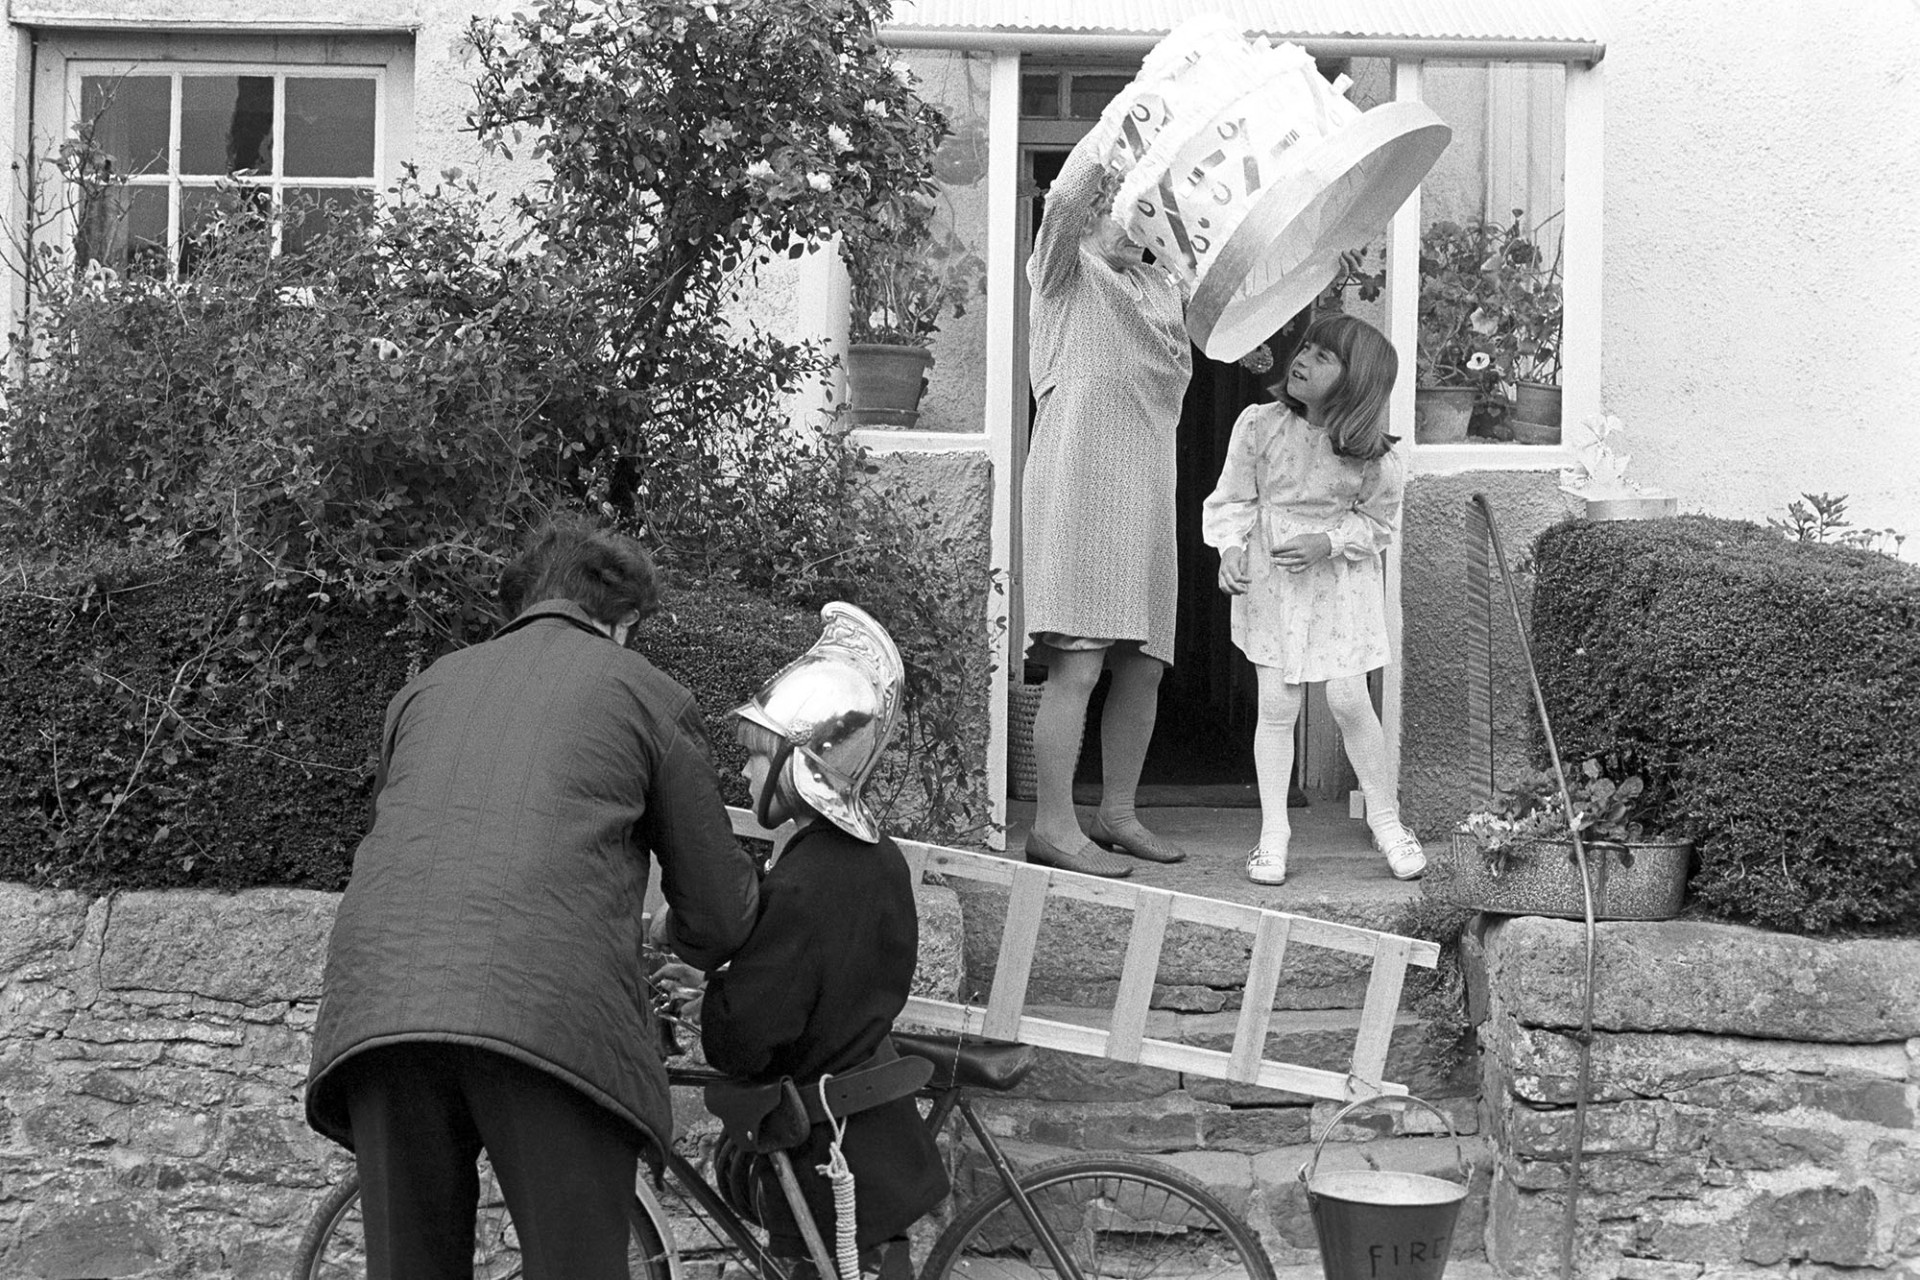 Children preparing for fancy dress parade. 
[Children outside their house getting ready in their costumes, with the help of a man and woman for a fancy dress parade at Winkleigh Fair. One child is dressed as a fireman and the other is dressed as a cake.]